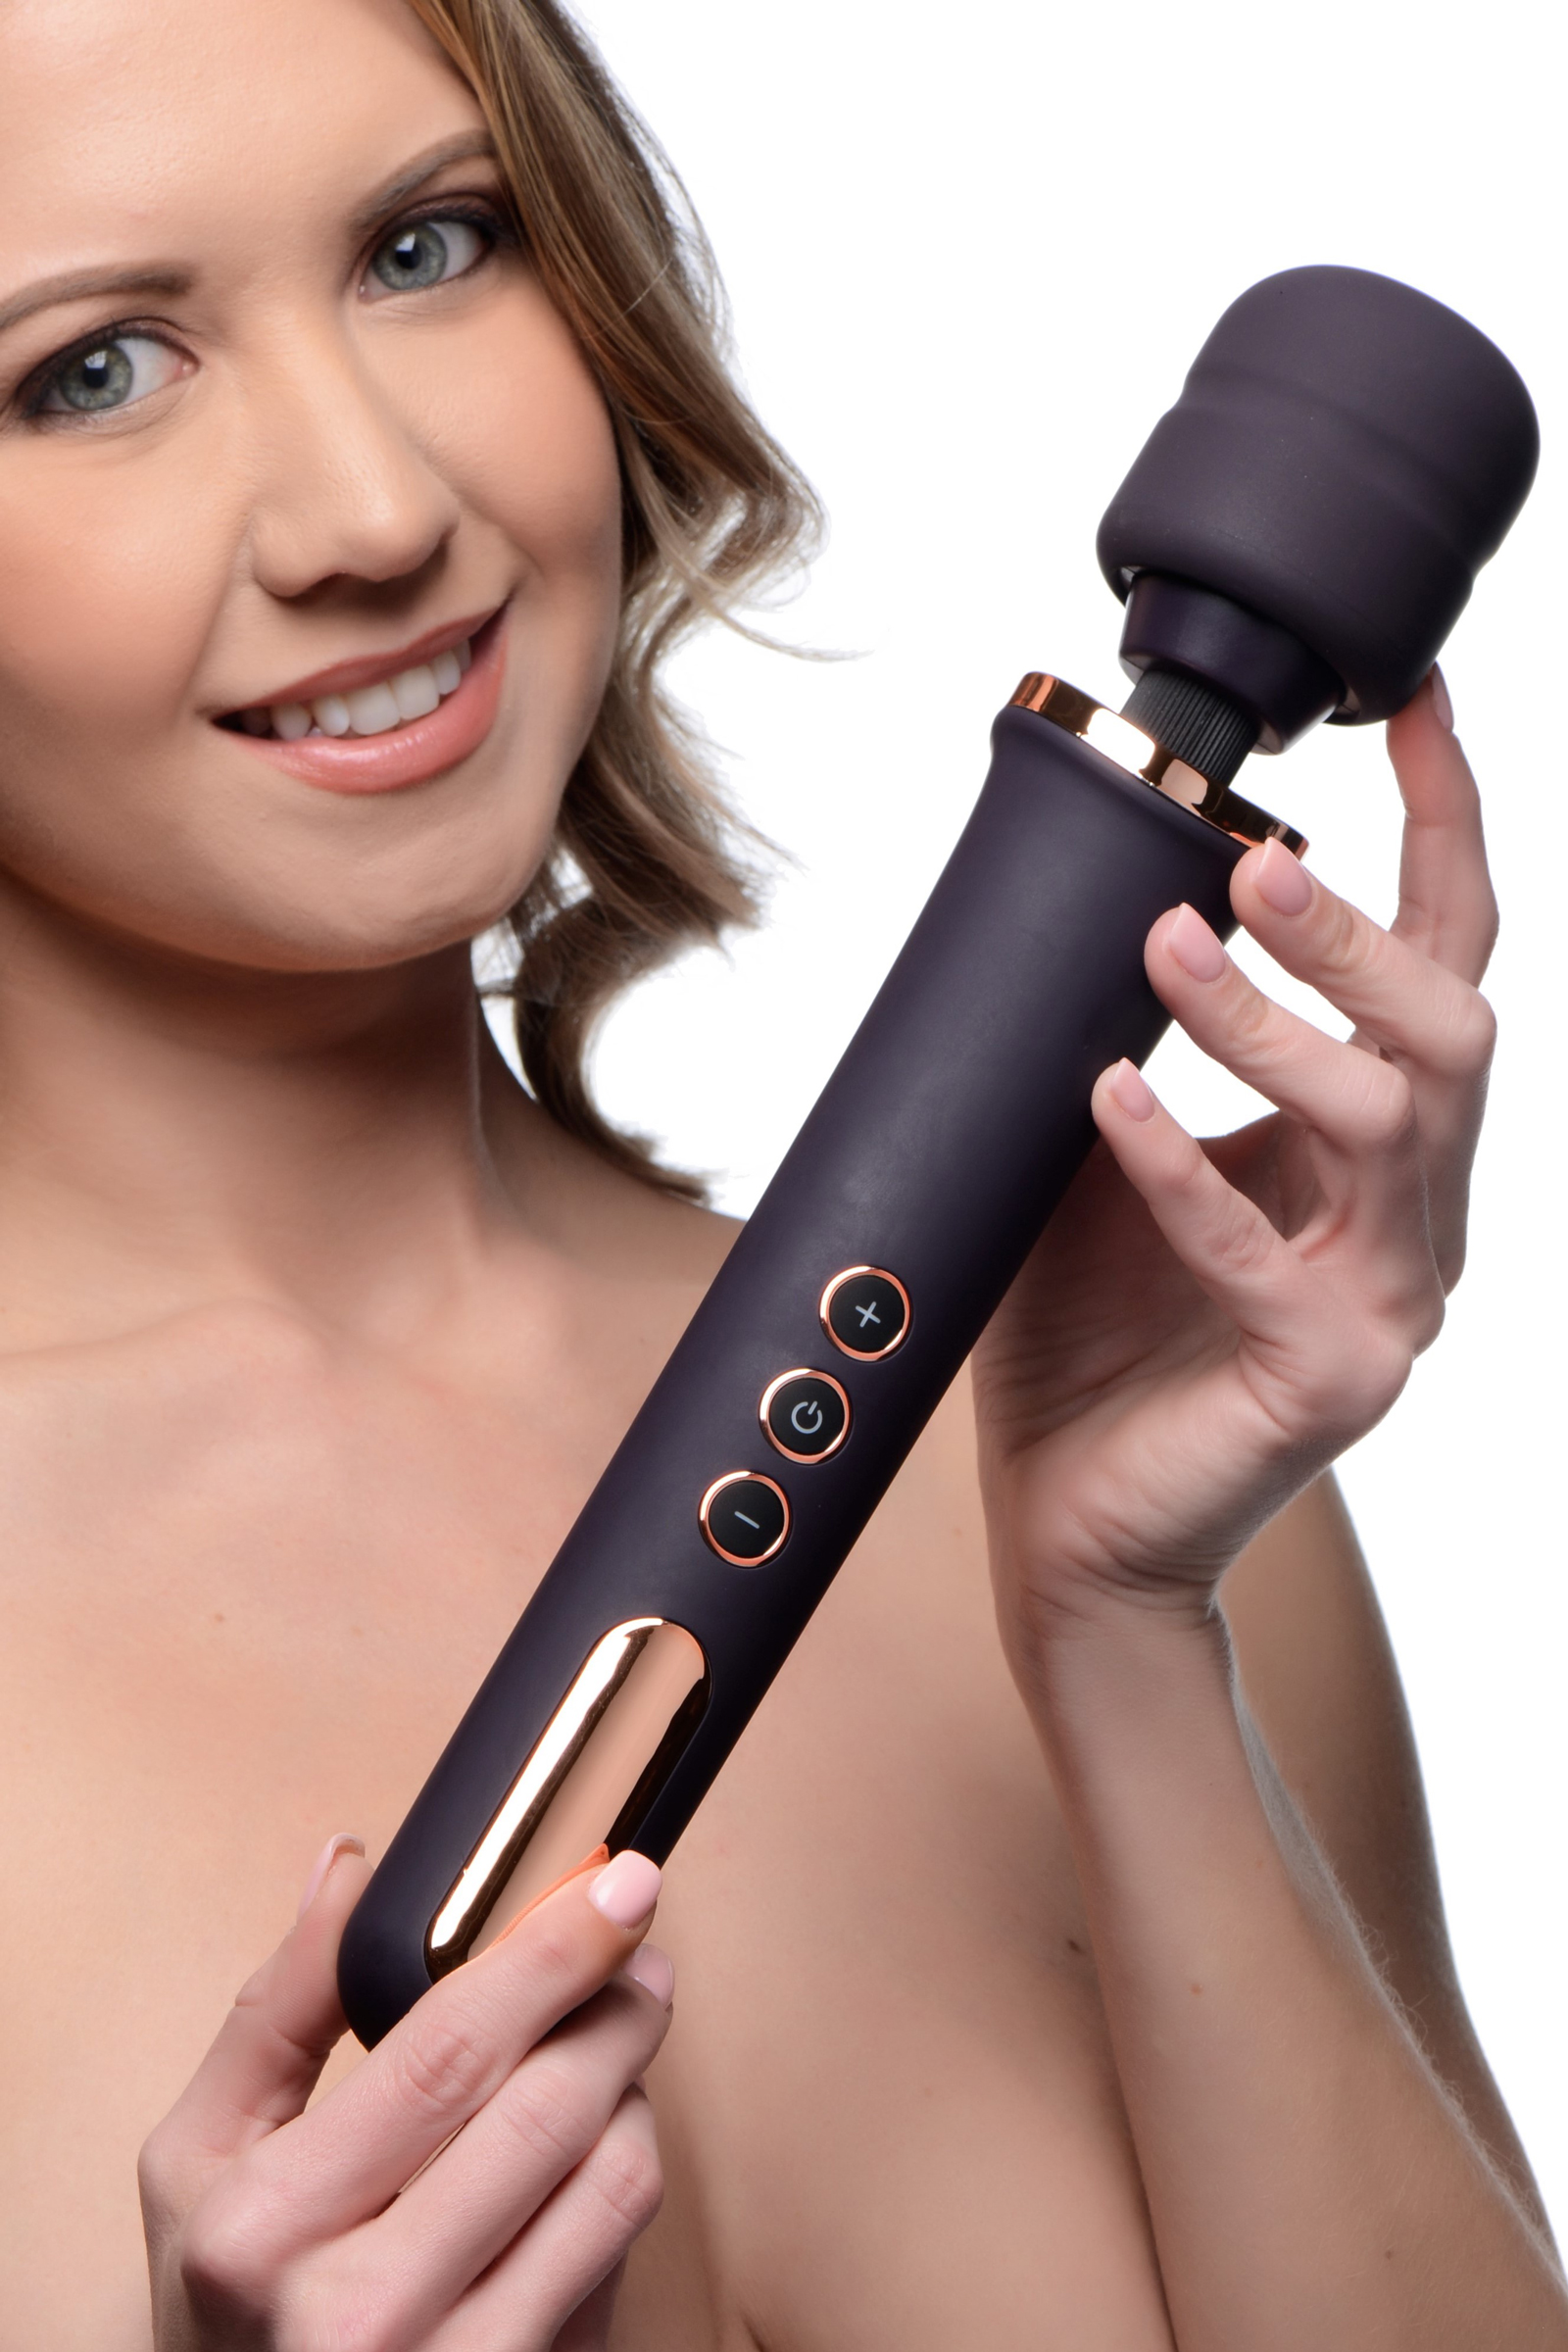 Standard Wand Massagers and Attachments